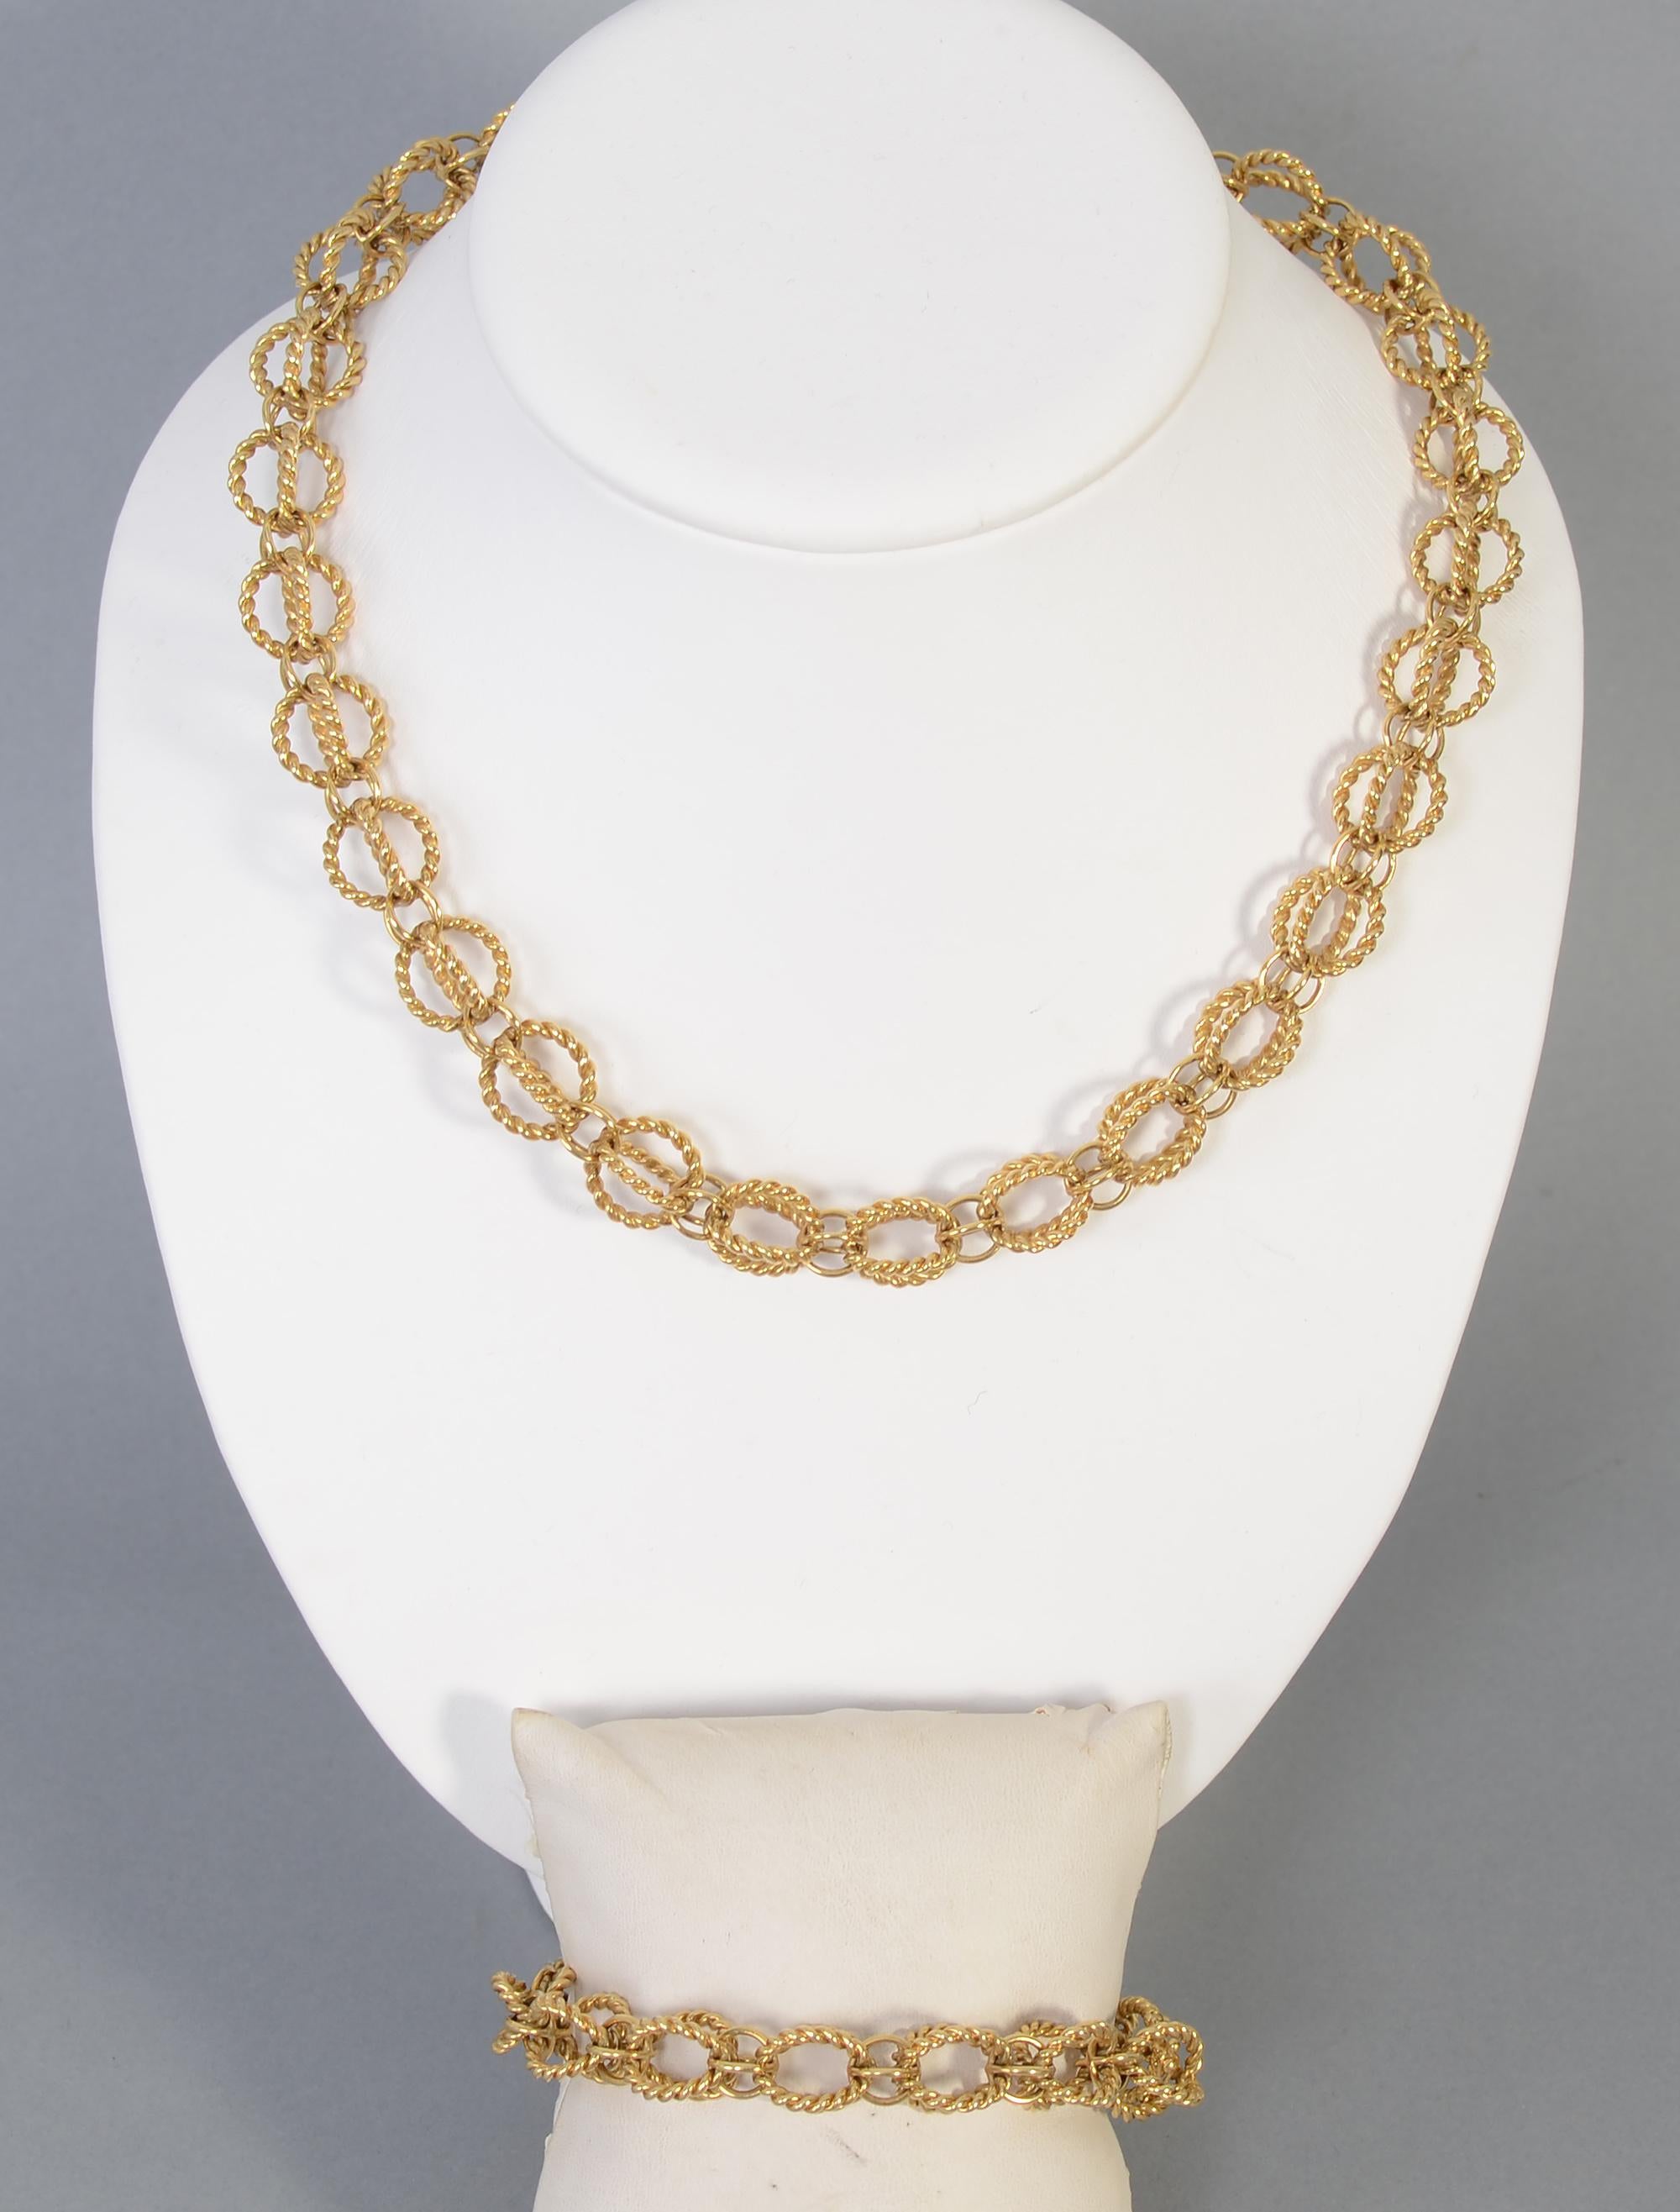 Schlumberger for Tiffany 18 karat gold circles necklace and bracelet.  Twisted gold three dimensional circles alternate with smaller smooth ones. The twisted circles are half an inch in diameter. The necklace is 18 inches in length and the bracelet